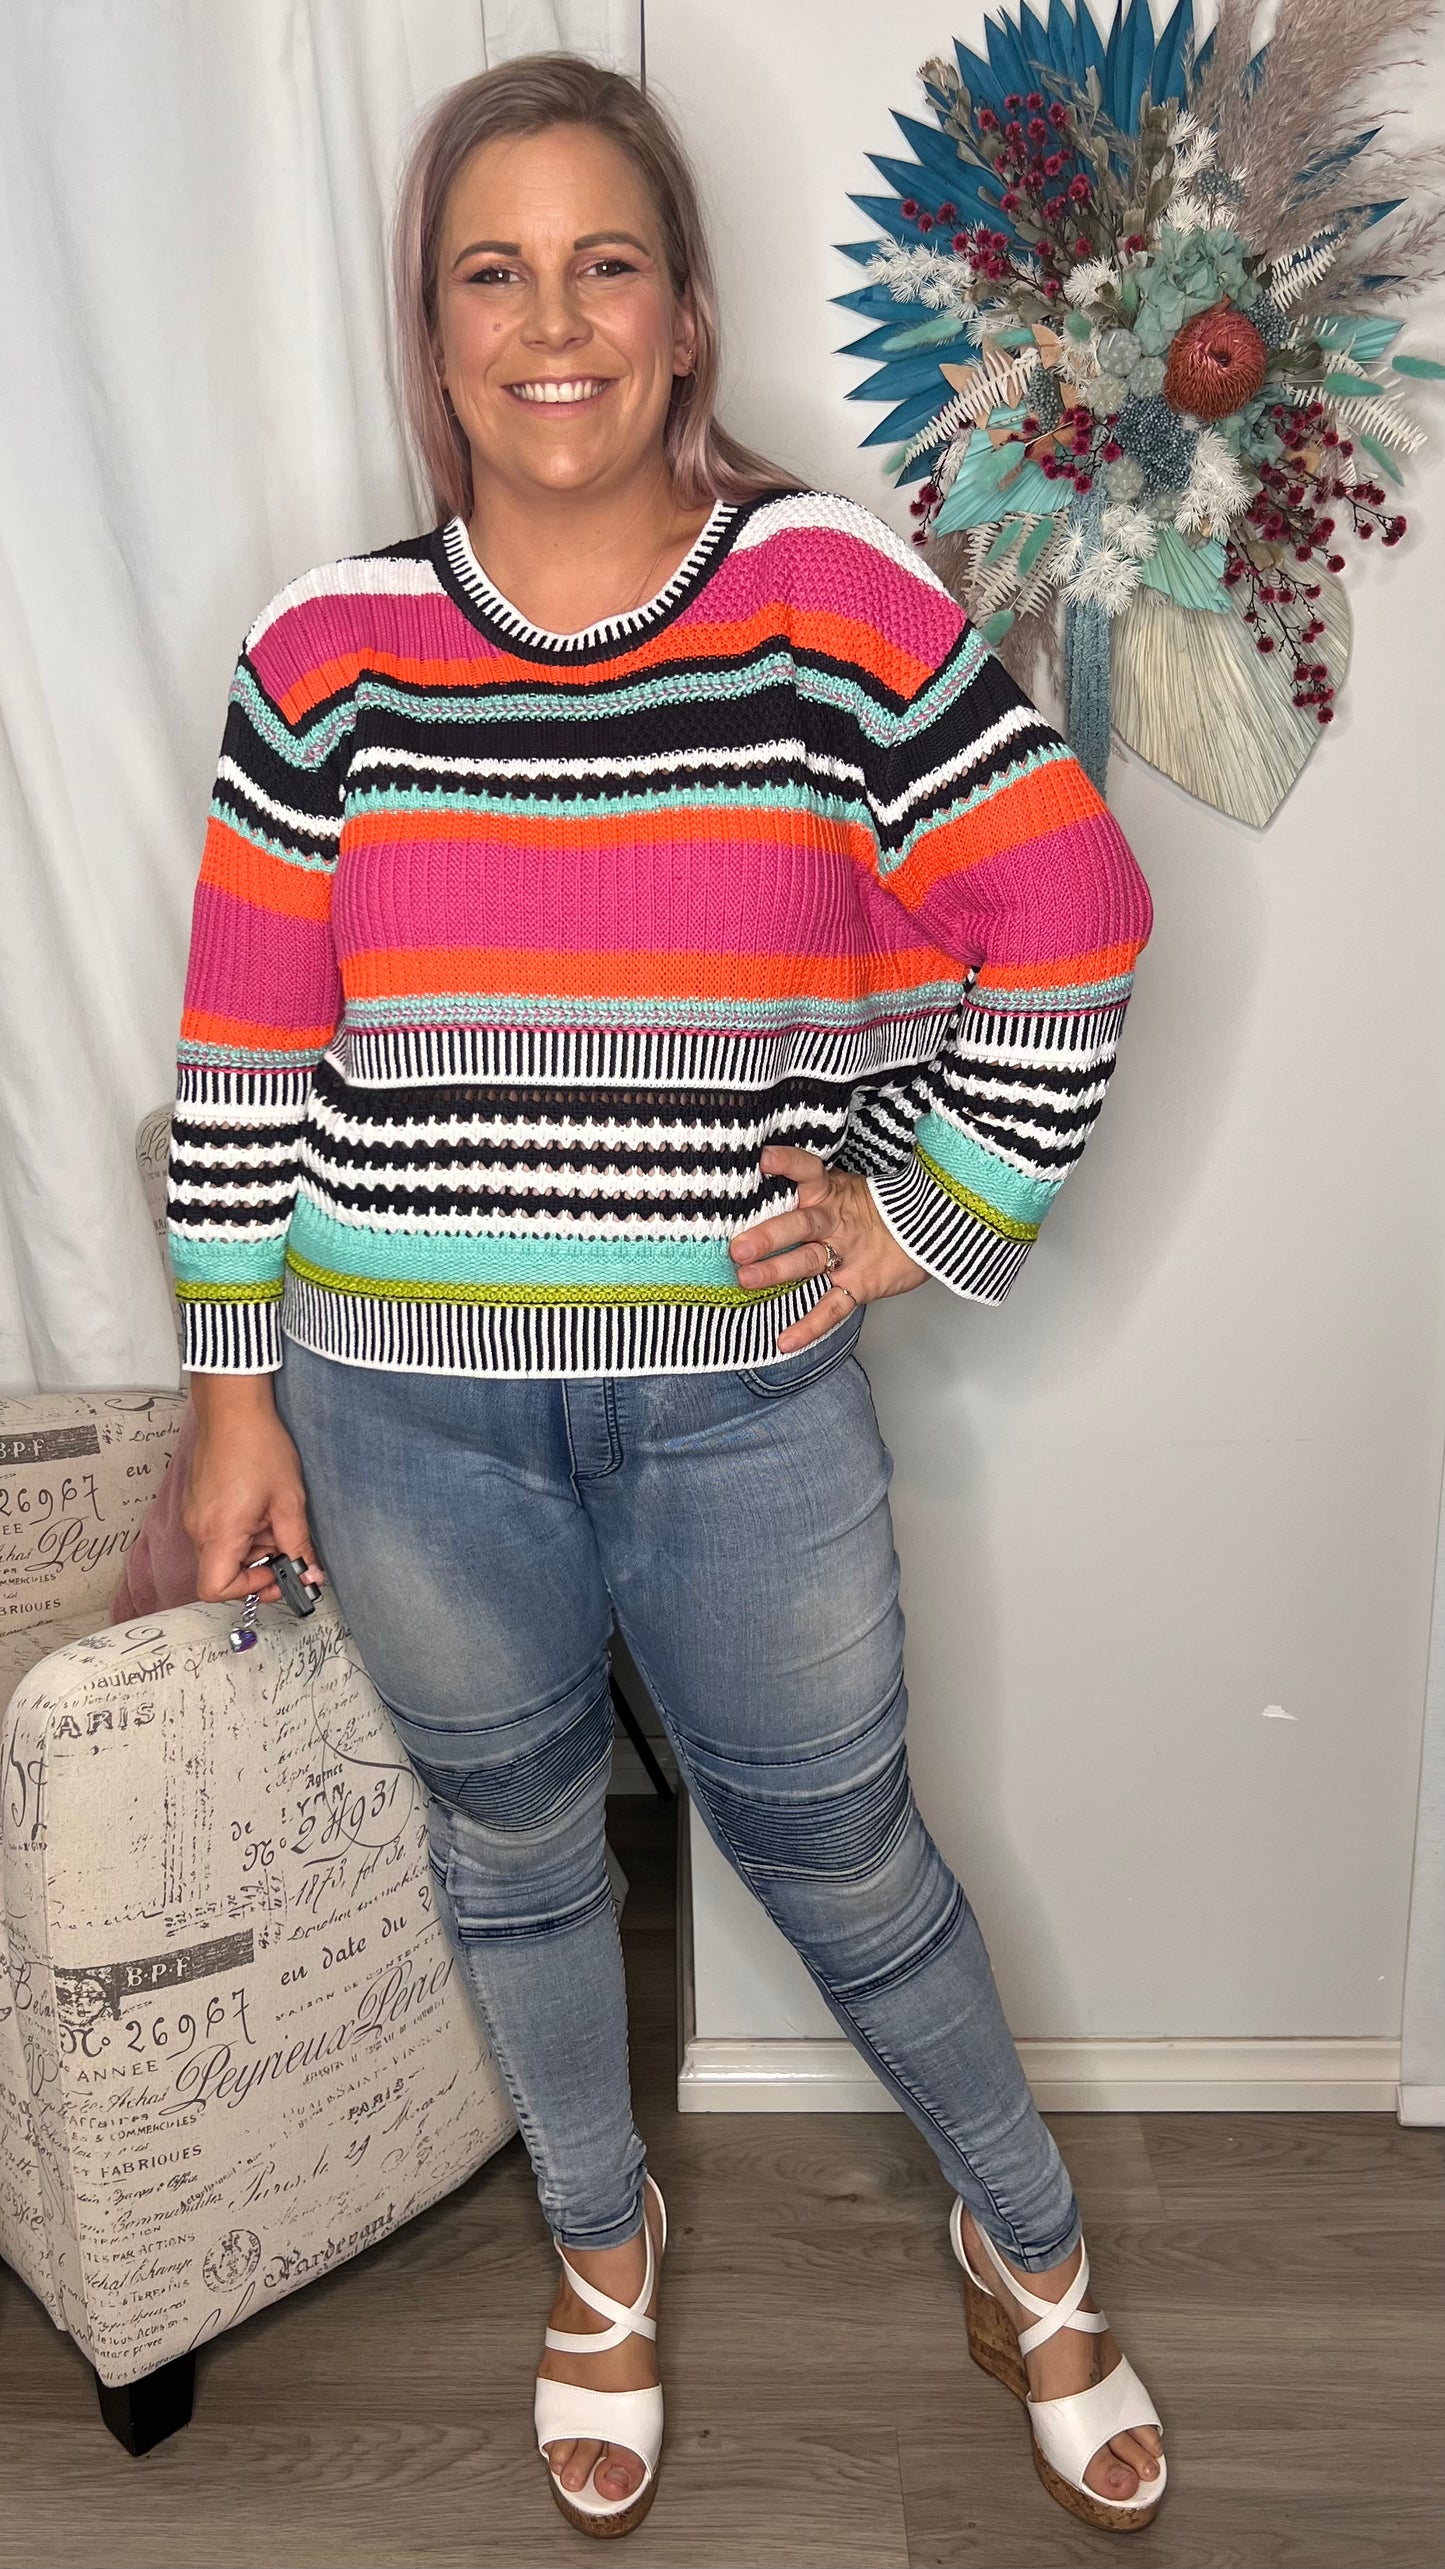 Gracie Knit Jumper: No drab colours this season! The Gracie Knit is a relaxed fit knit in two bright and cheerful prints
Features:

Short lenth
Wide sleeves

Sizing: Gracie is a relaxed - Ciao Bella Dresses 